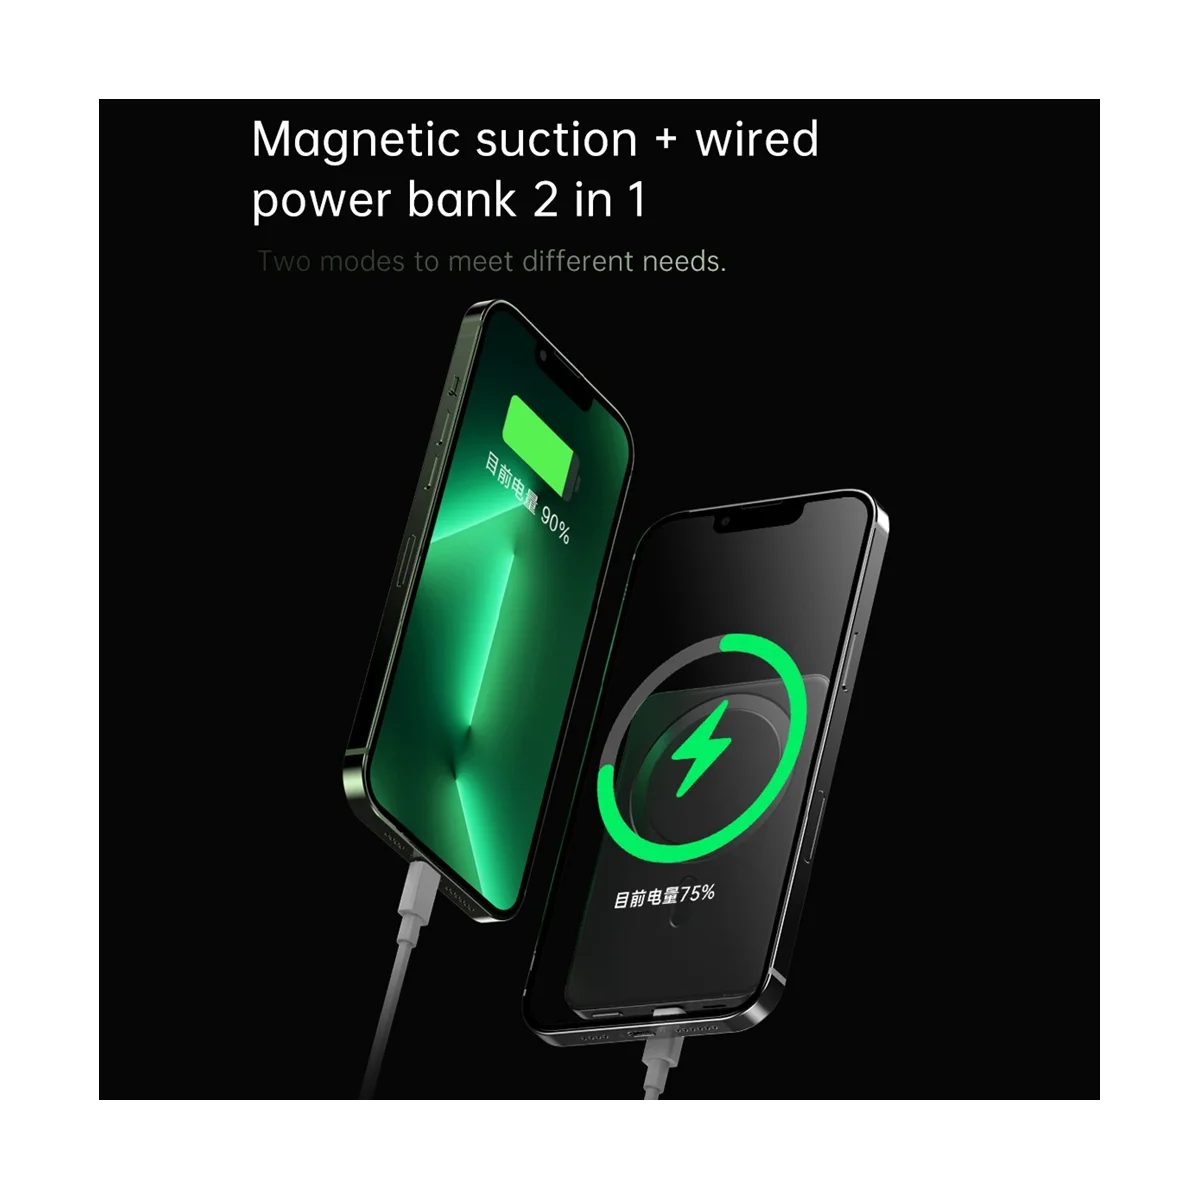 

20W 10000MAh Macsafe Powerbank Magnetic Power Bank Wireless Charger Portable Charger 20W Power Bank Fast Charging,GREEN